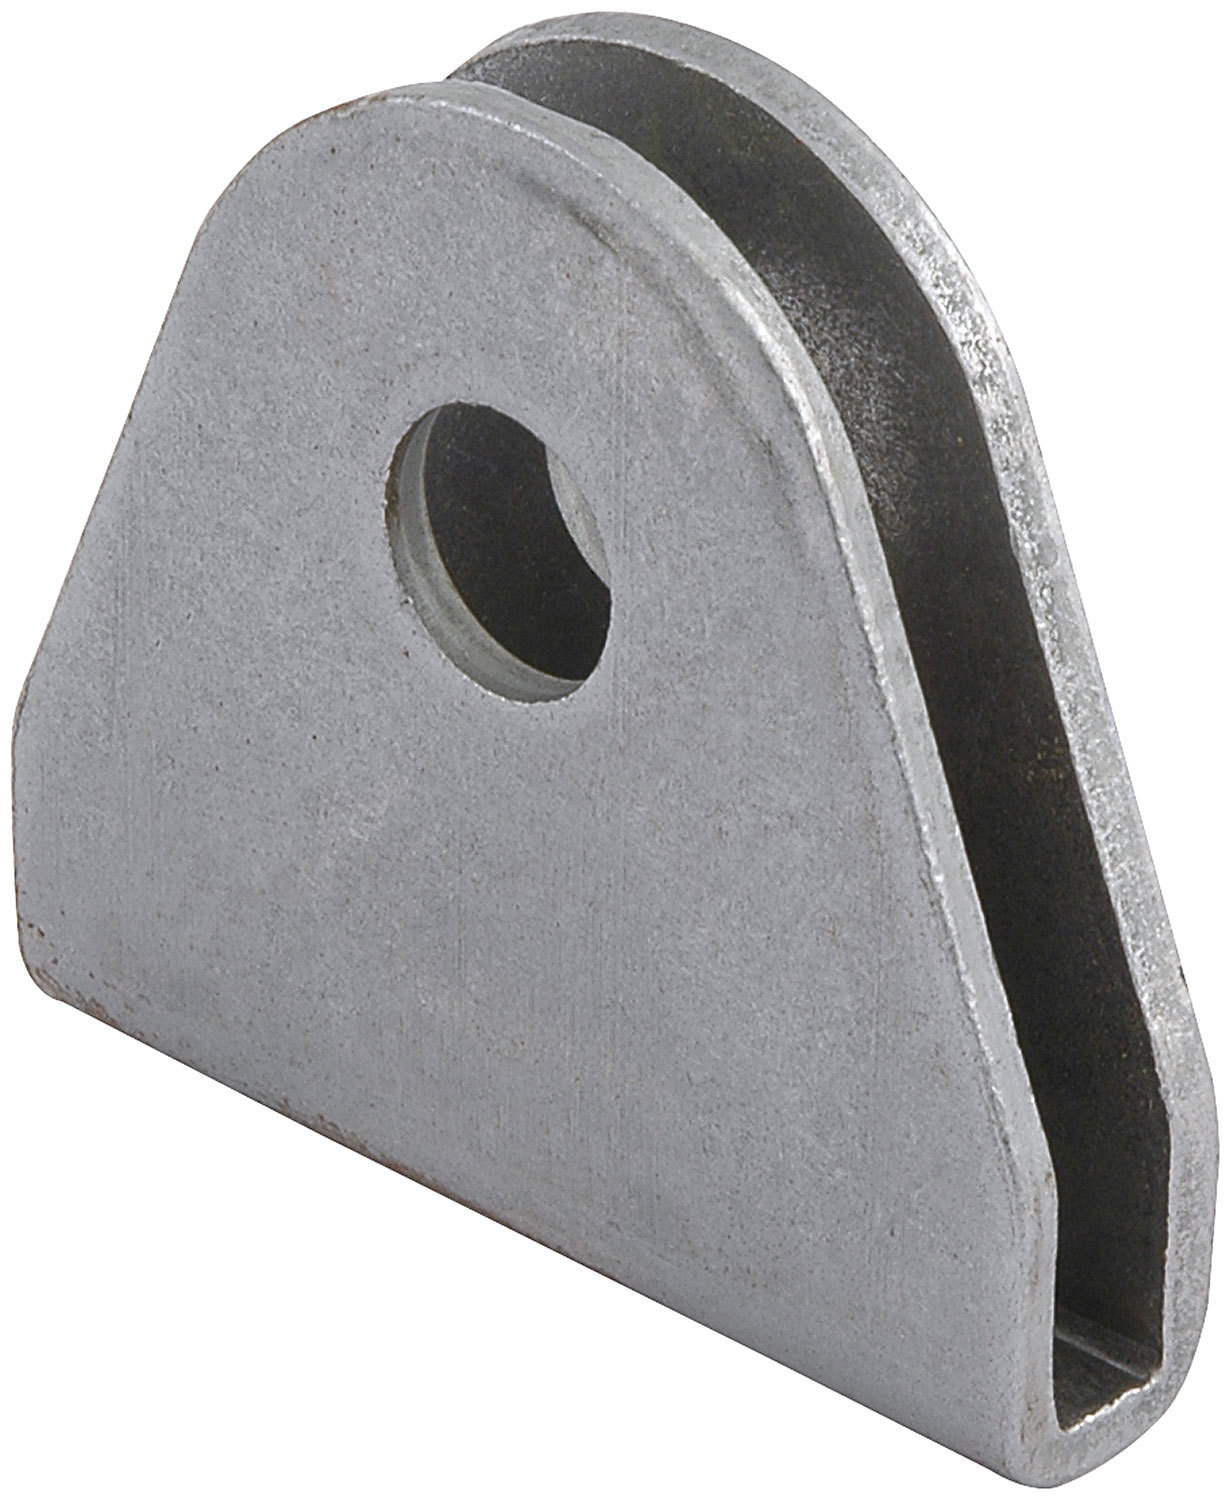 Allstar Performance 60031 - Seat Belt Tab, Double Shear, 1/2 in Seat Belt Mounting Hole, Steel, Natural, Each